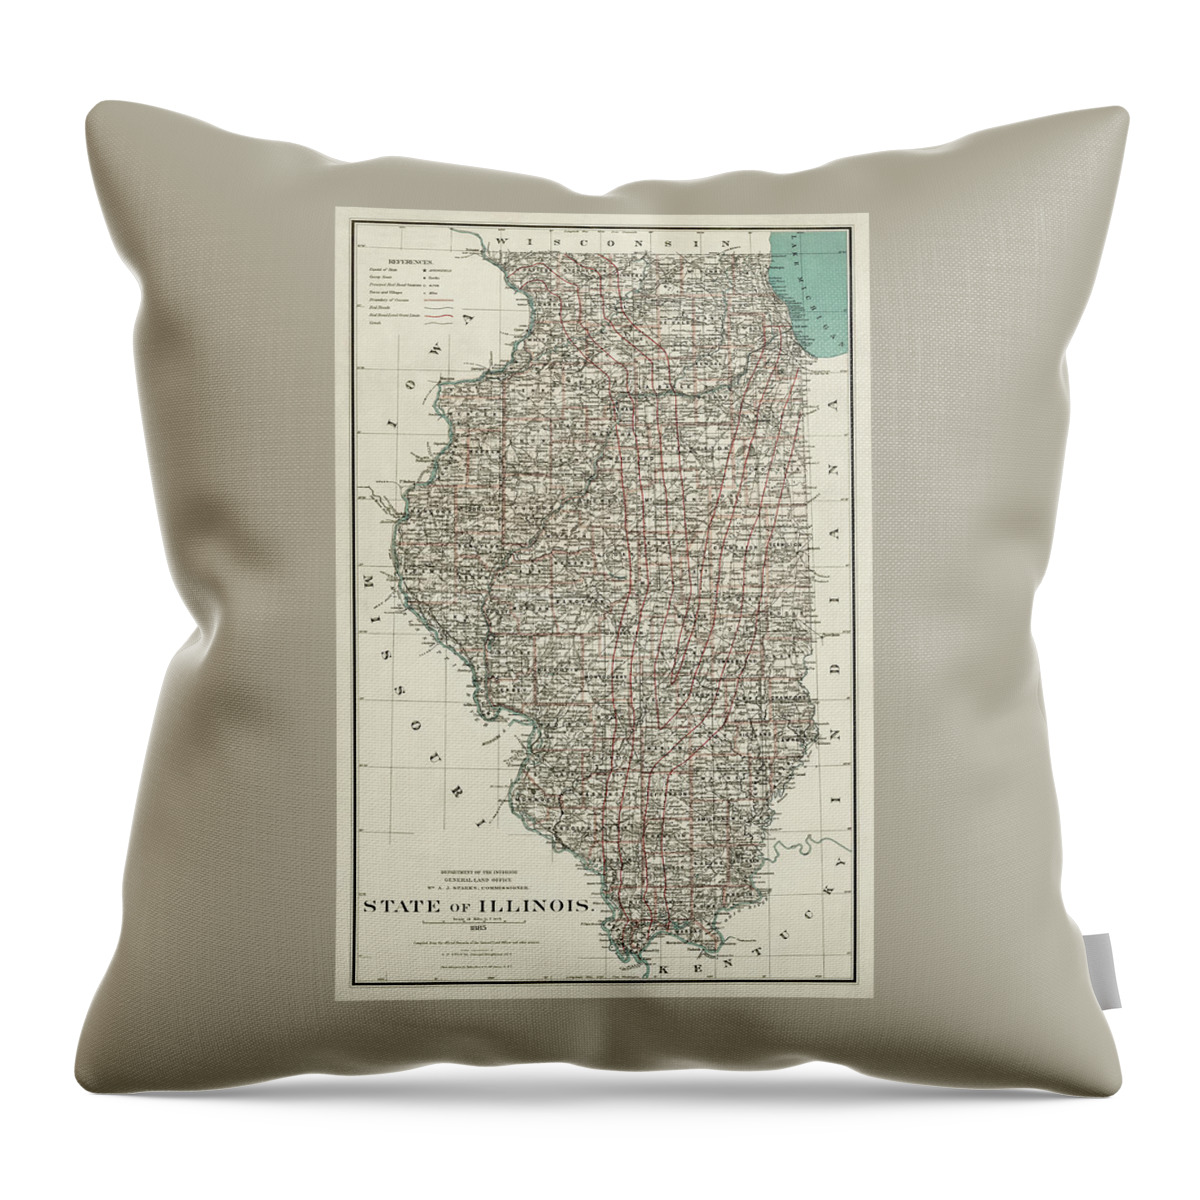 Illinois Throw Pillow featuring the photograph State of Illinois Antique Map 1885 by Carol Japp